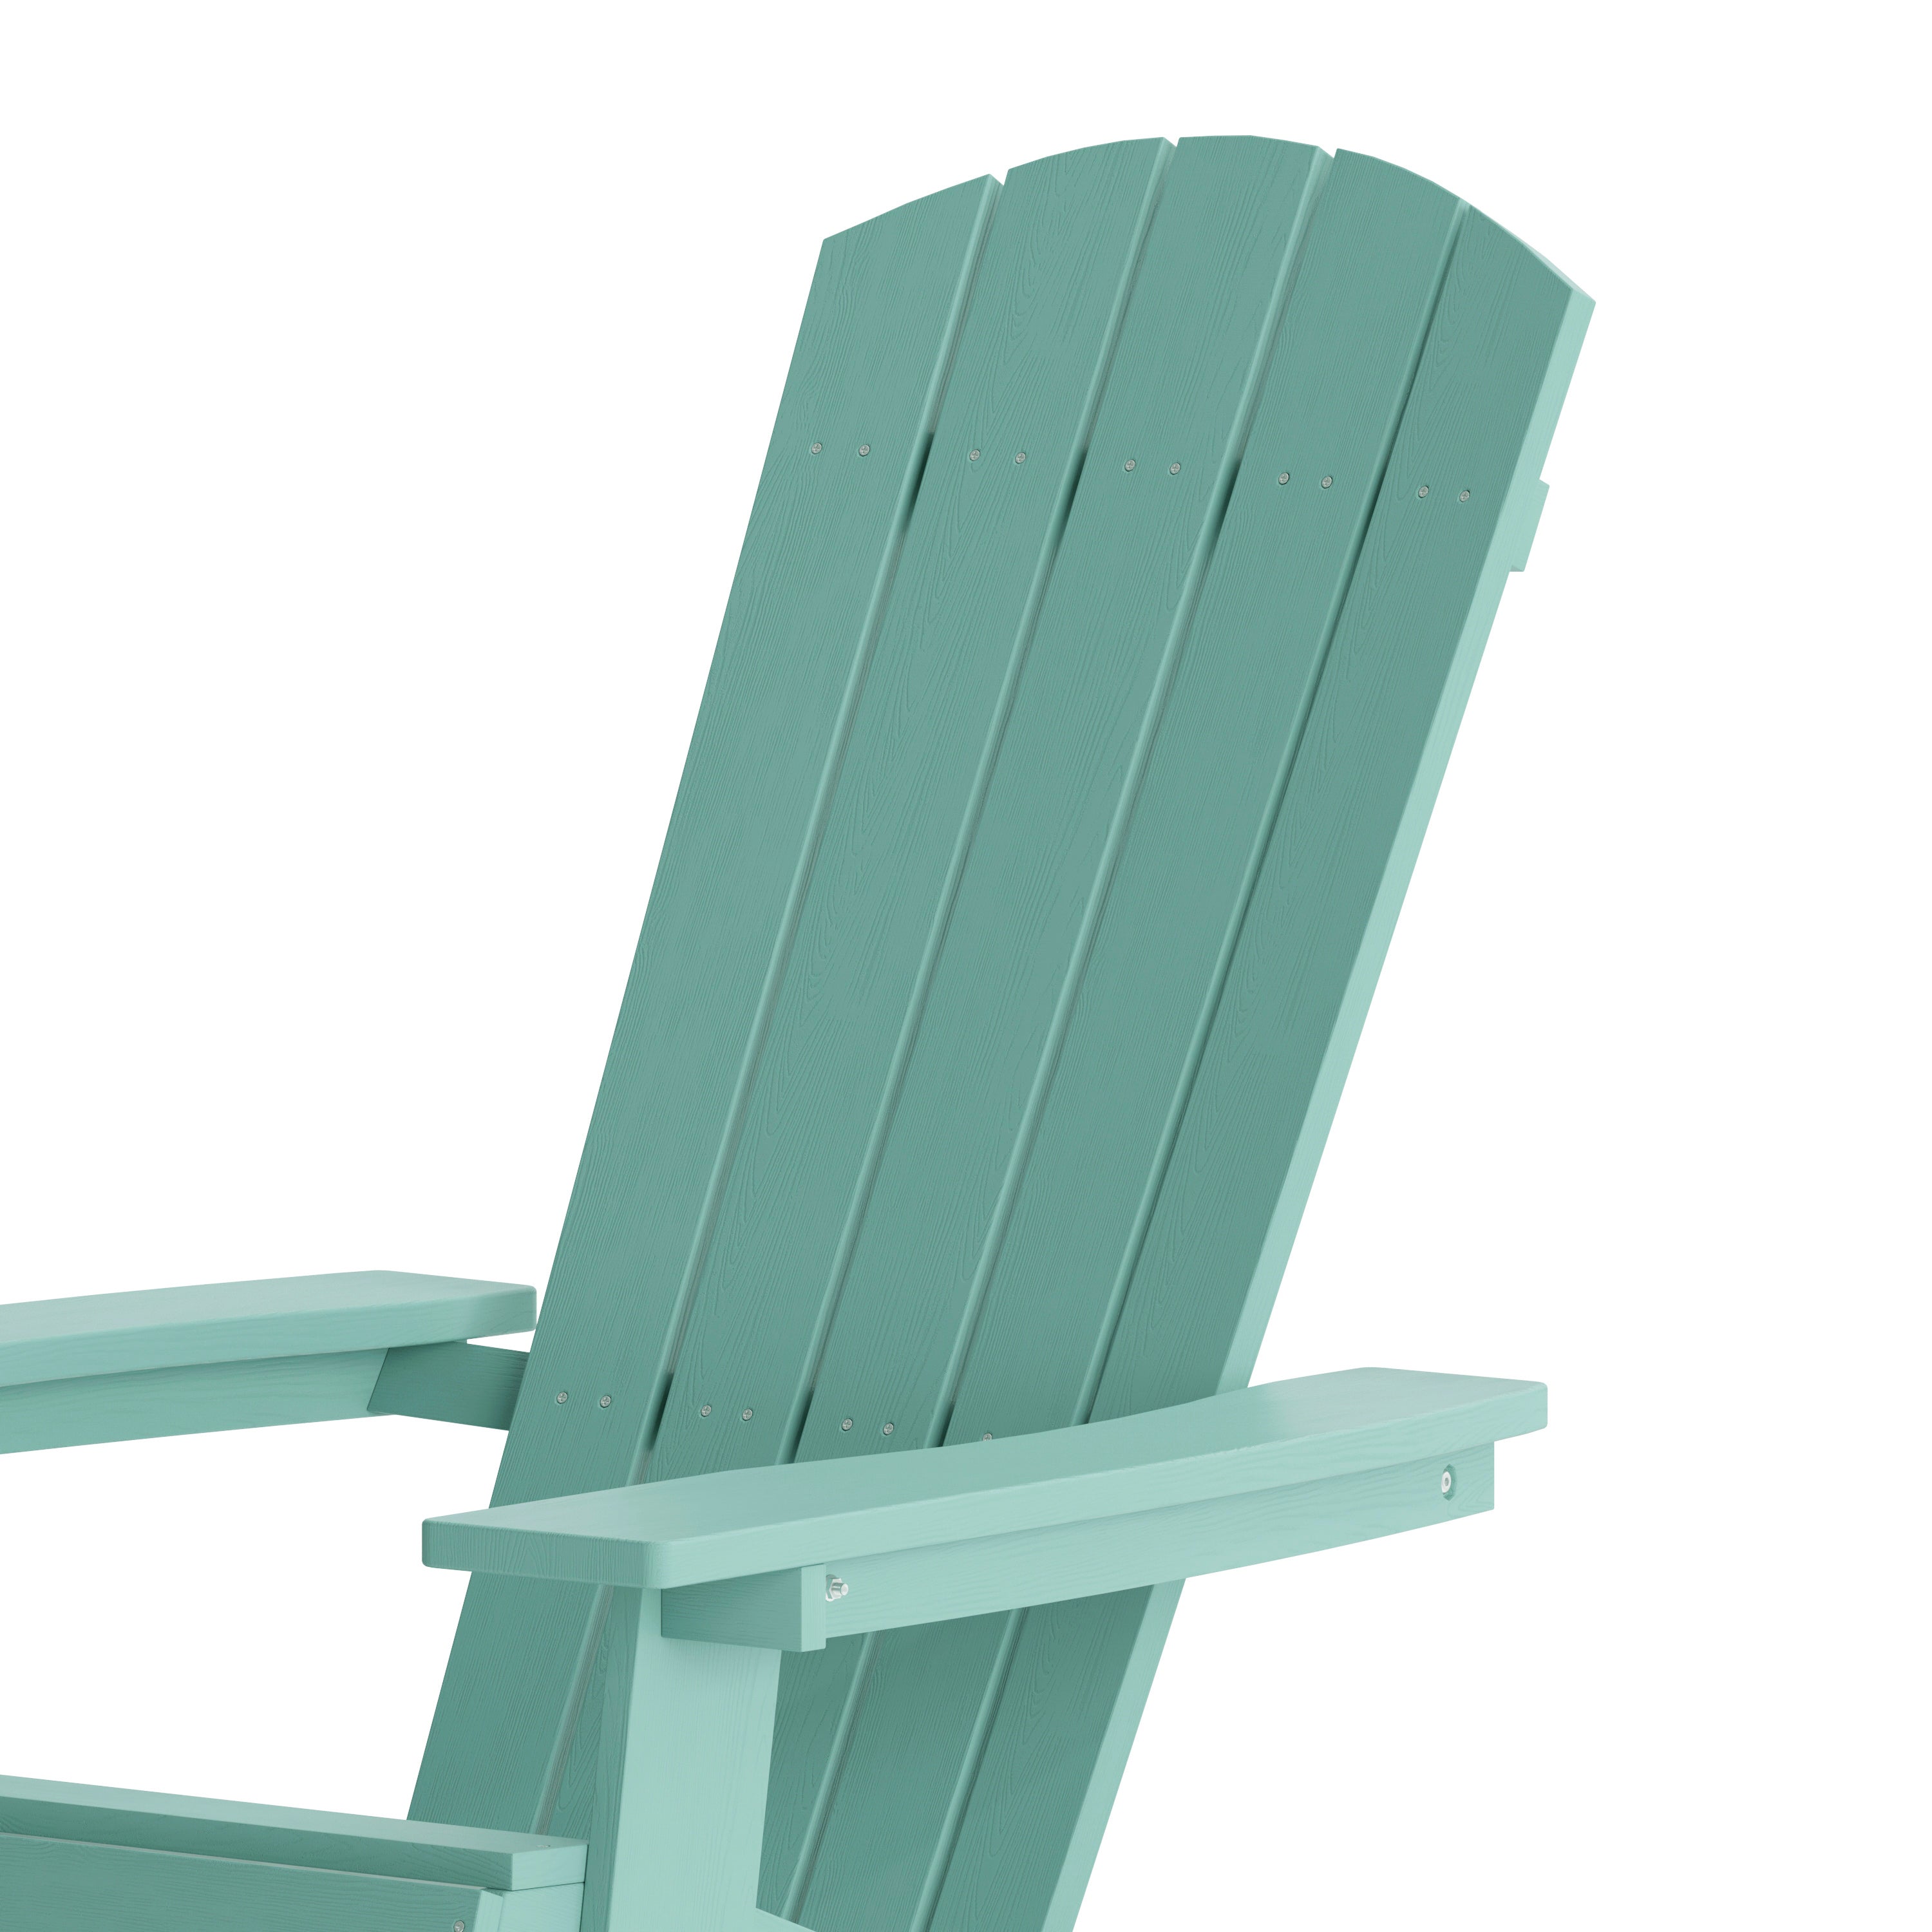 Charlestown All-Weather Poly Resin Indoor/Outdoor Folding Adirondack Chair-Adirondack Chair-Flash Furniture-Wall2Wall Furnishings